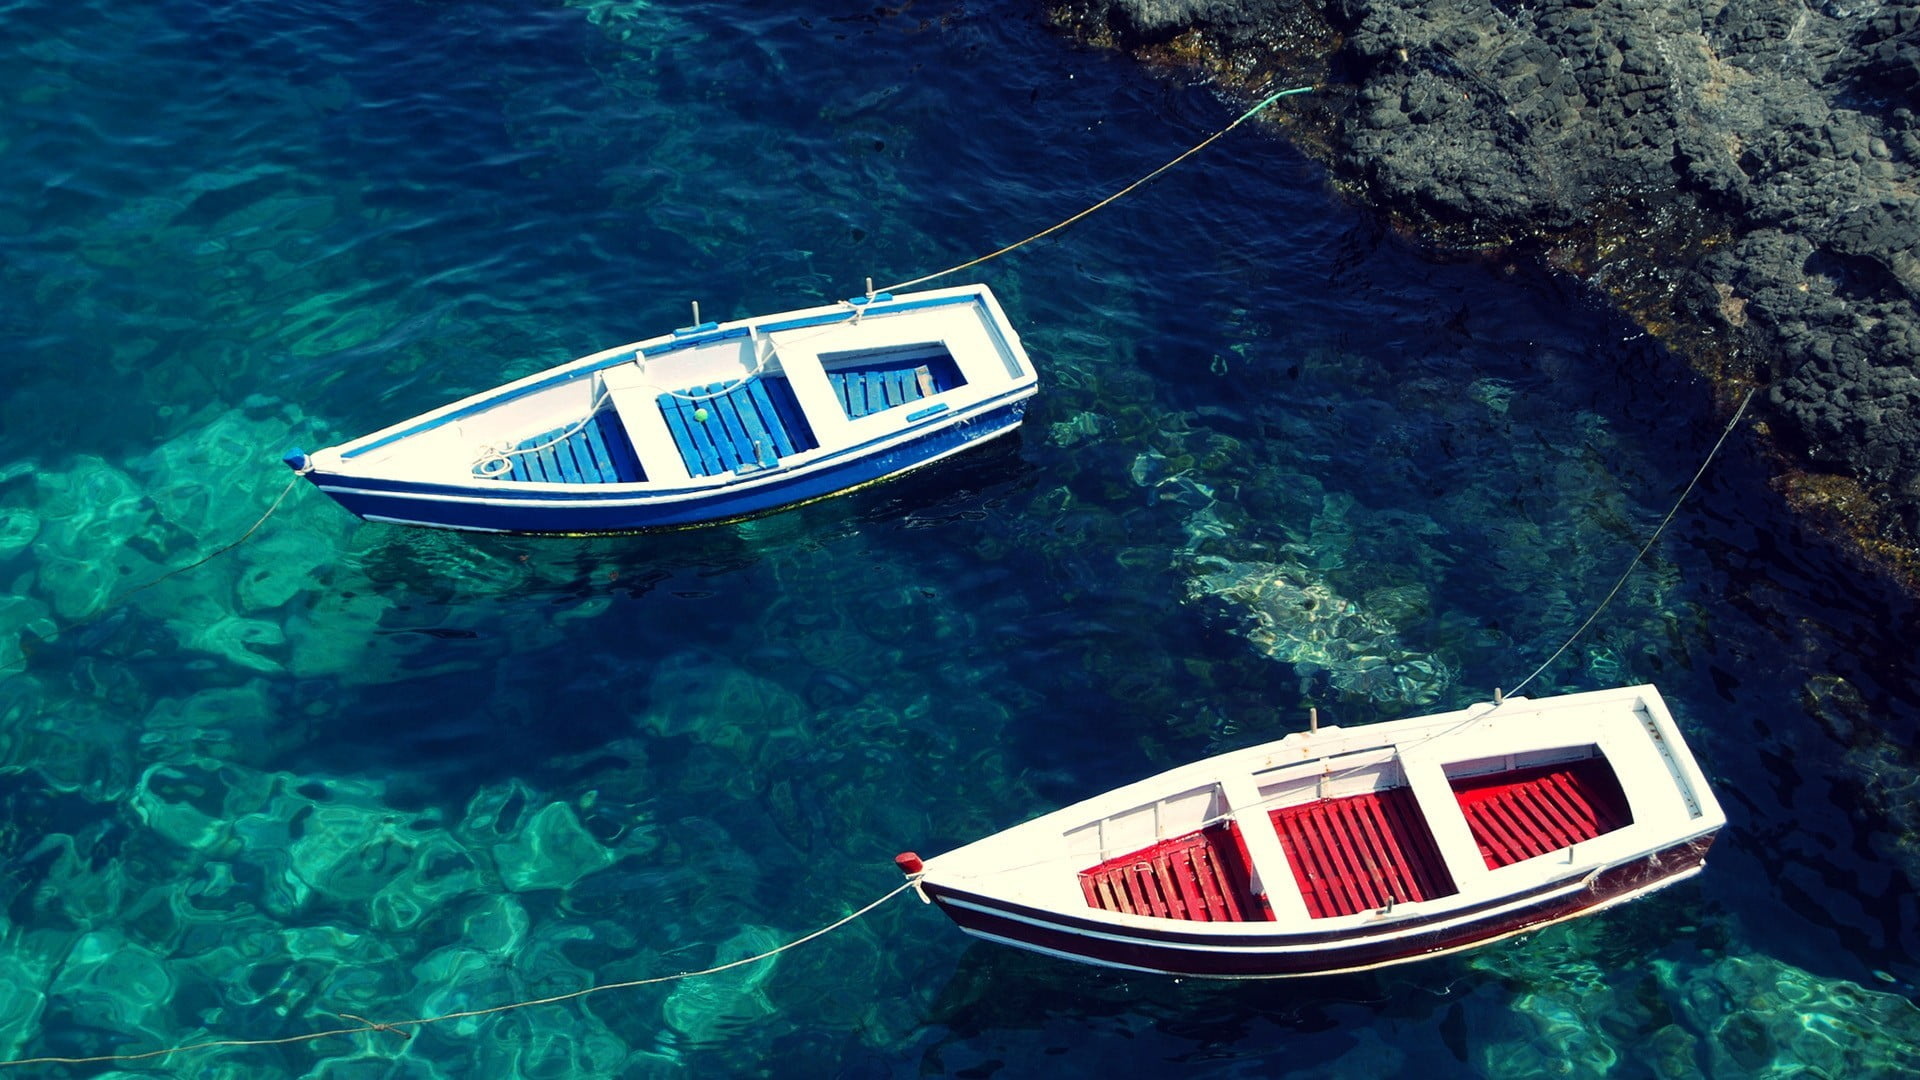 Skiff: Dinghy boats, Vessels with a squared stern and angled bow. 1920x1080 Full HD Wallpaper.